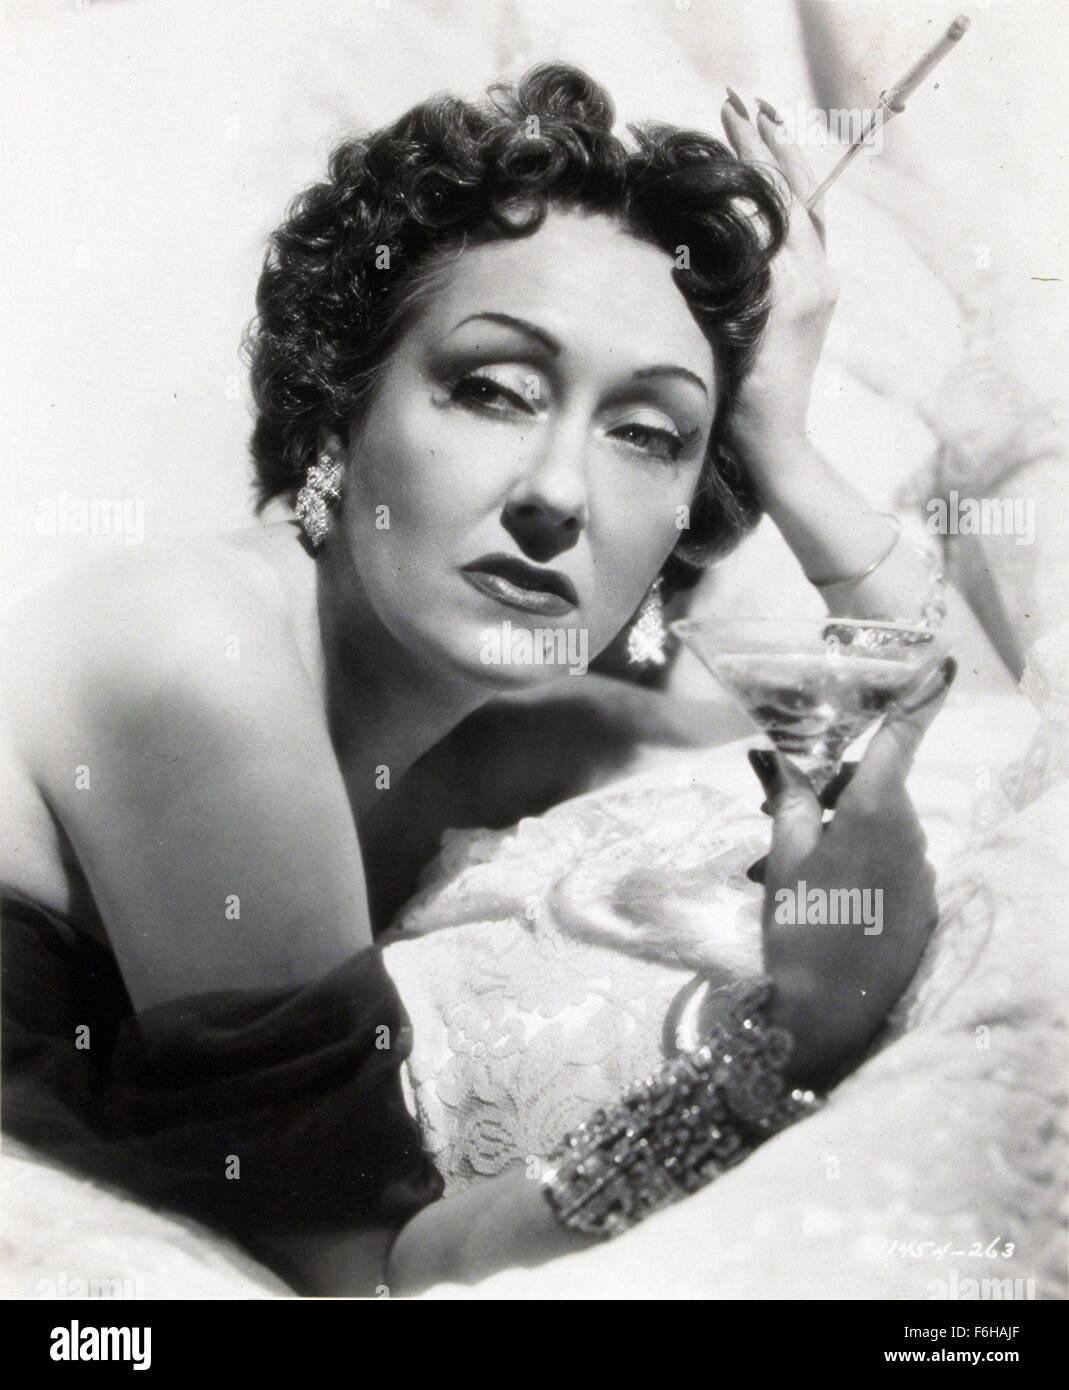 1950, Film Title: SUNSET BOULEVARD, Director: BILLY WILDER, Pictured: ACCESSORIES, CHAMPAGNE, CIGARETTE, CIGARETTE HOLDER, DRINKING, GLASS OF, GLORIA SWANSON. (Credit Image: SNAP) Stock Photo